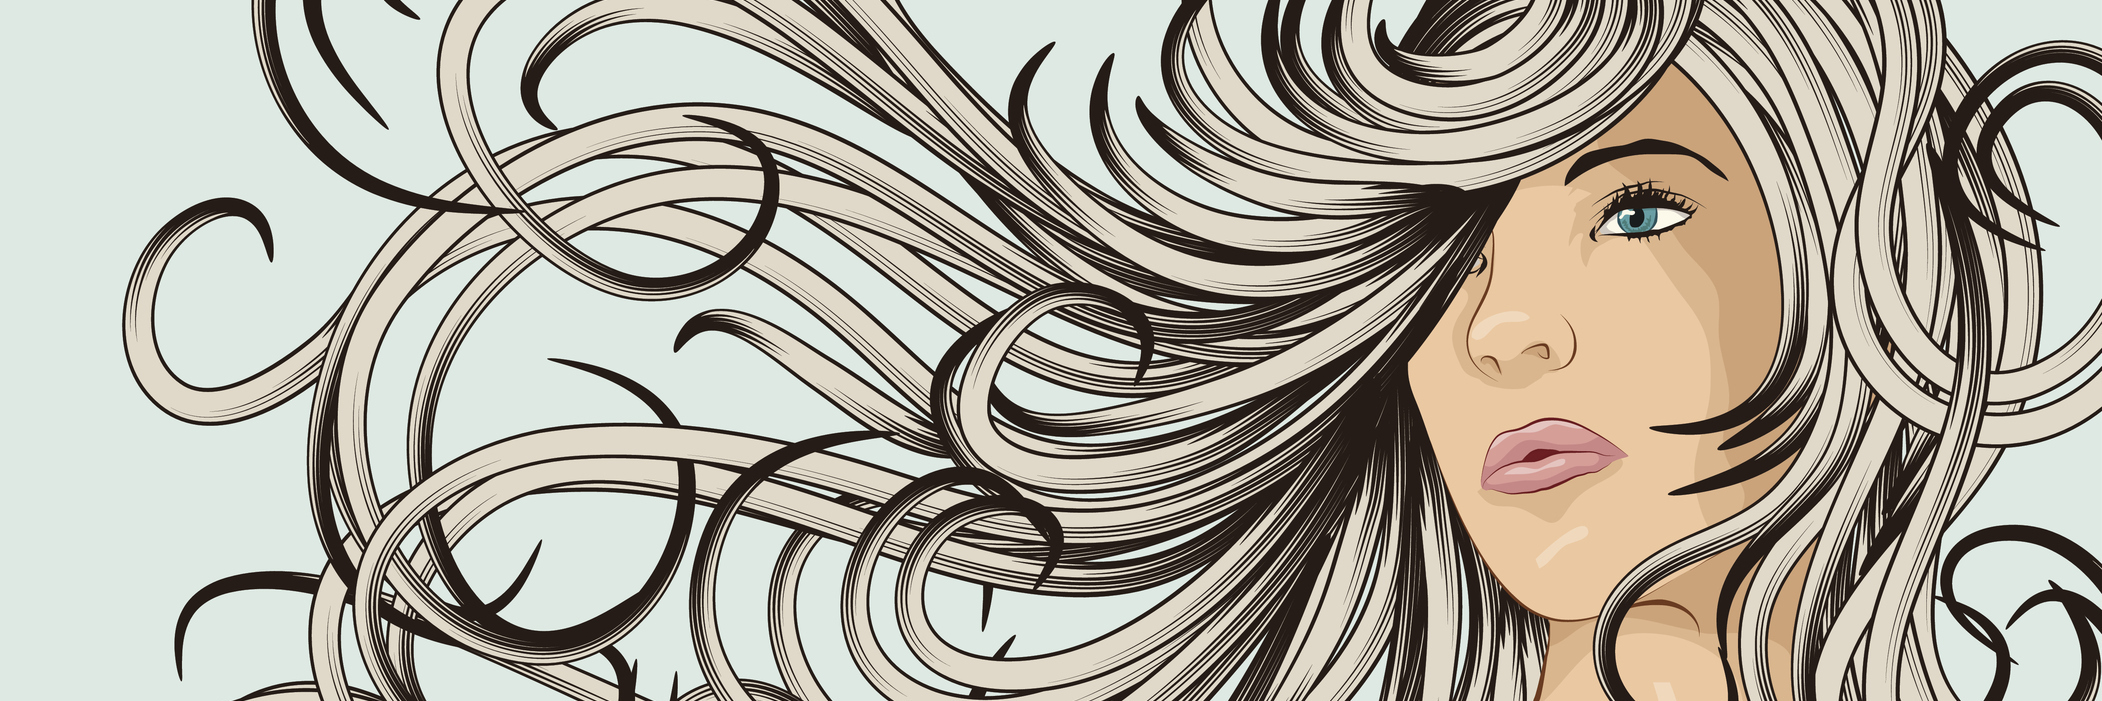 "Beautiful woman with long hair blowing in the wind. Face, hair and background are on separate layers. Each hair strand is individual object. Easily change colors . Extra folder includes Illustrator CS2 AI and PDF files."